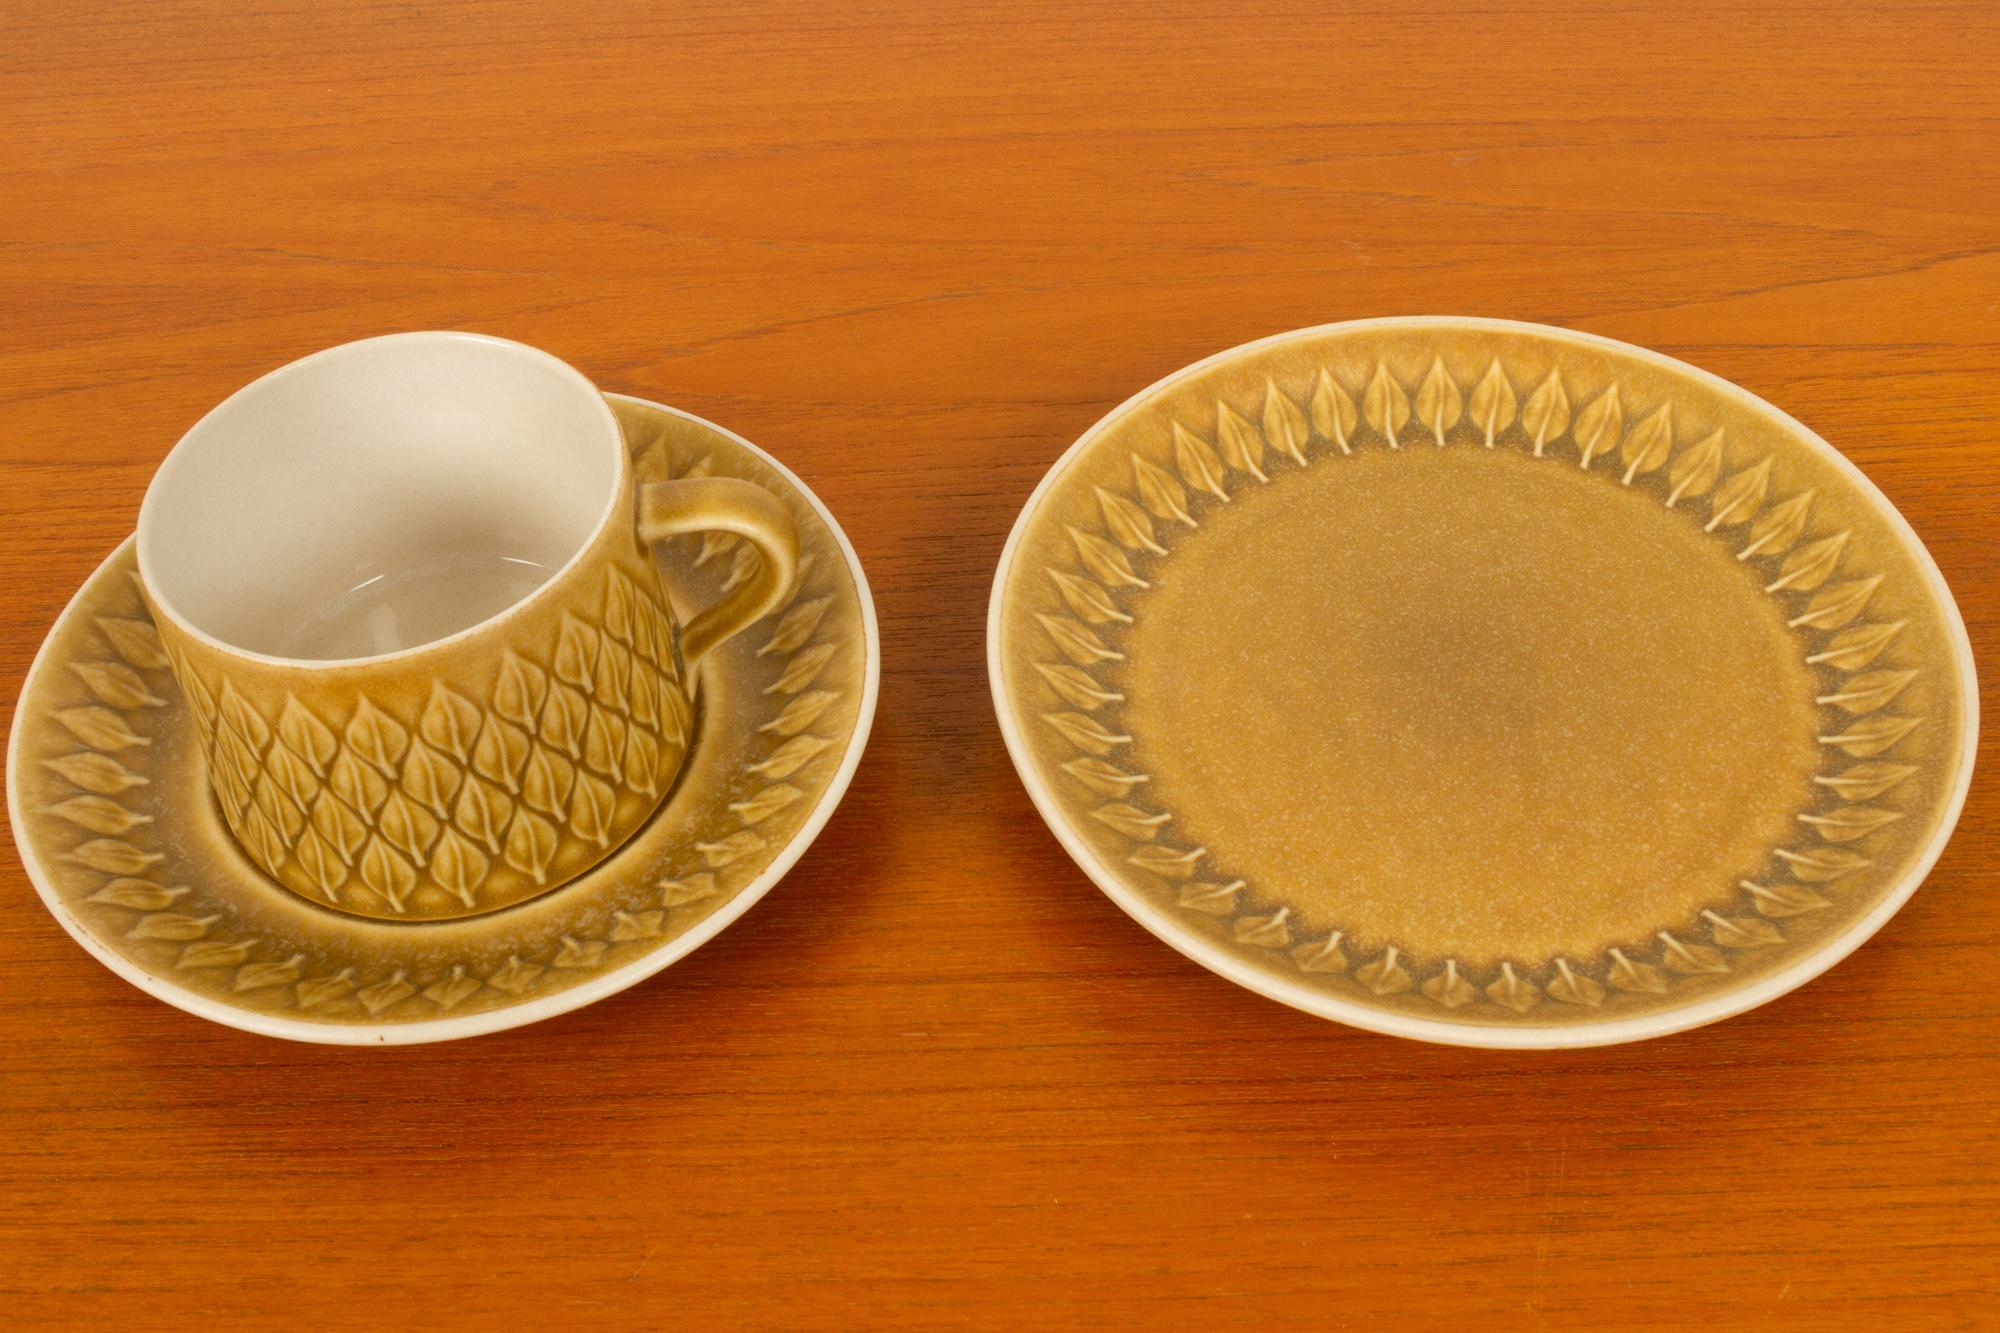 Mid-20th Century Vintage Danish Tableware by J. H. Quistgaard, 1960s For Sale